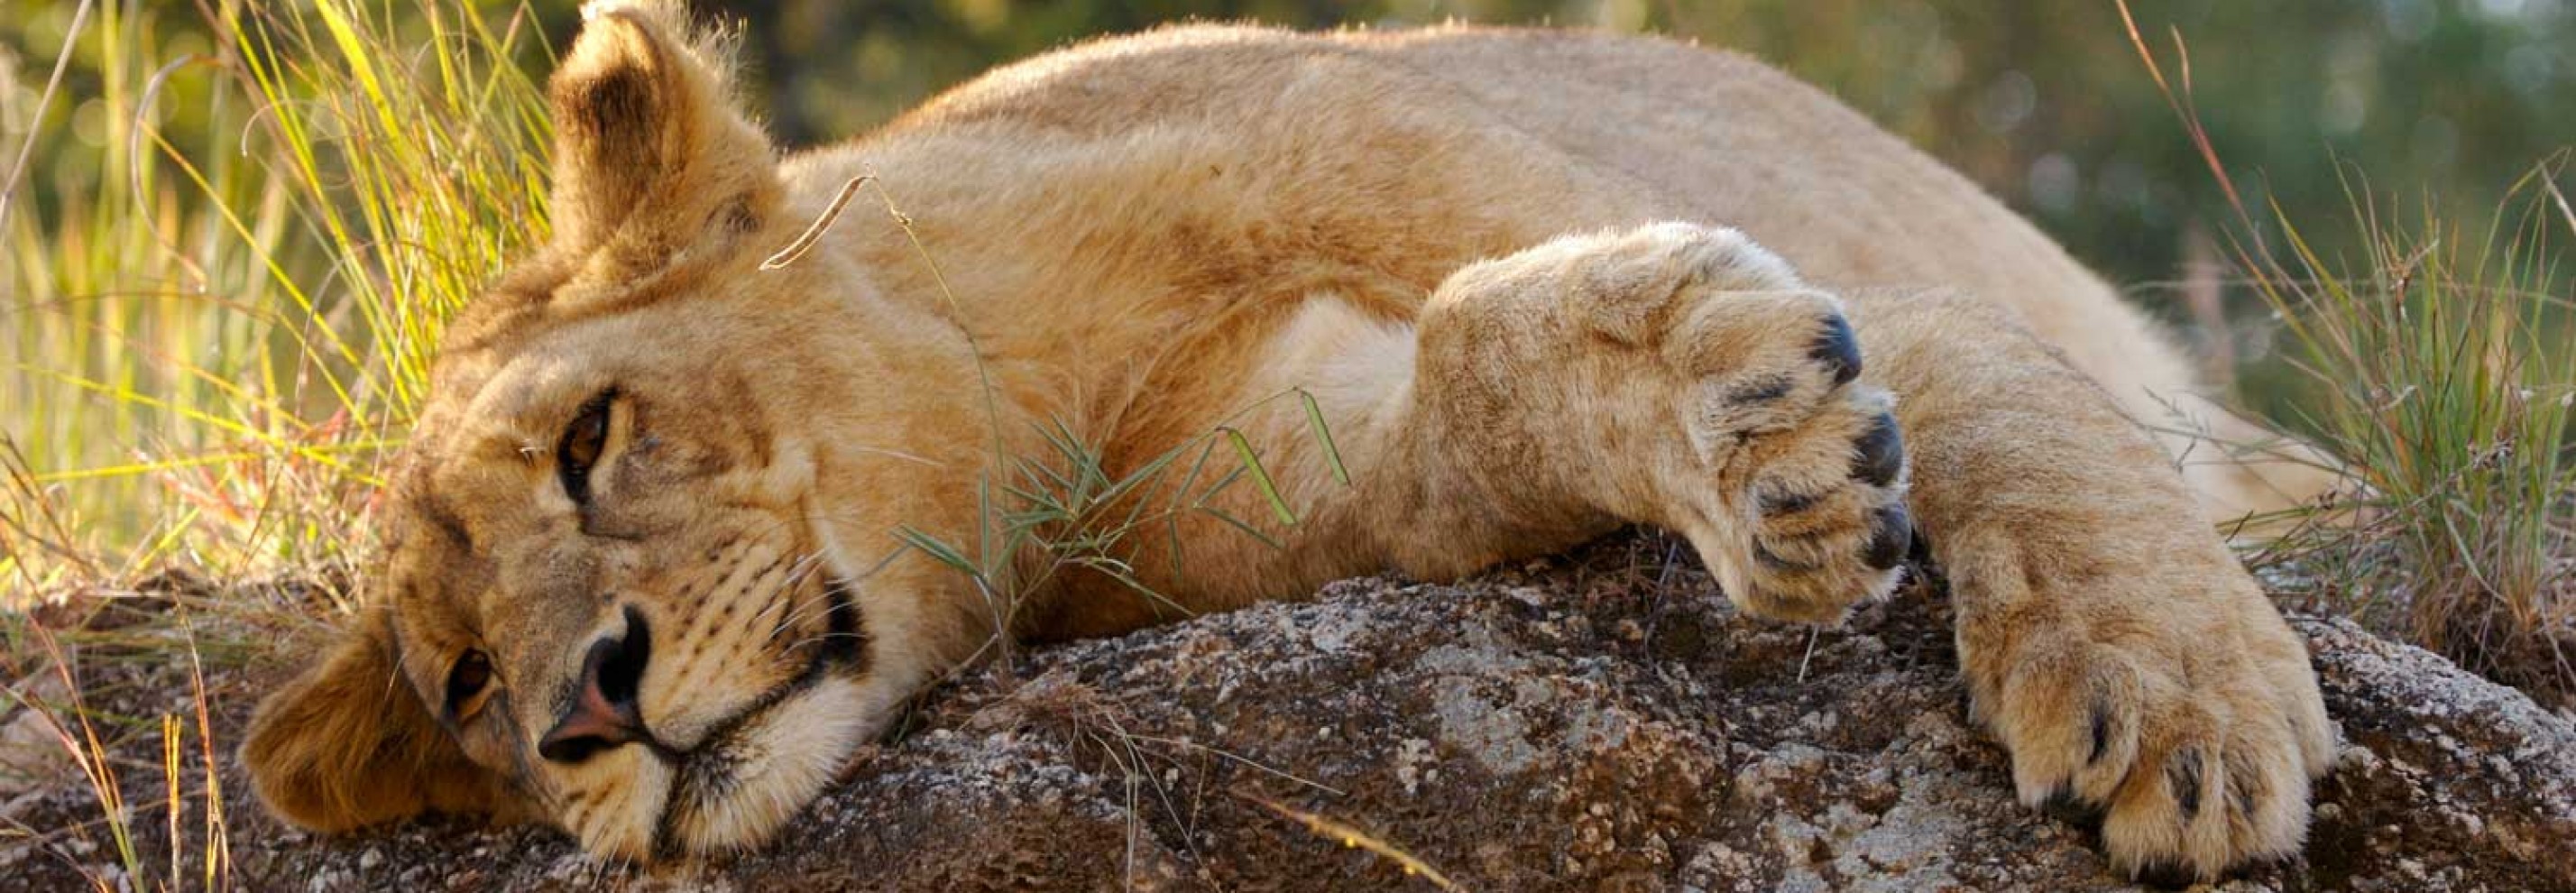 About Lions - ALERT | African Lion & Environmental Research Trust